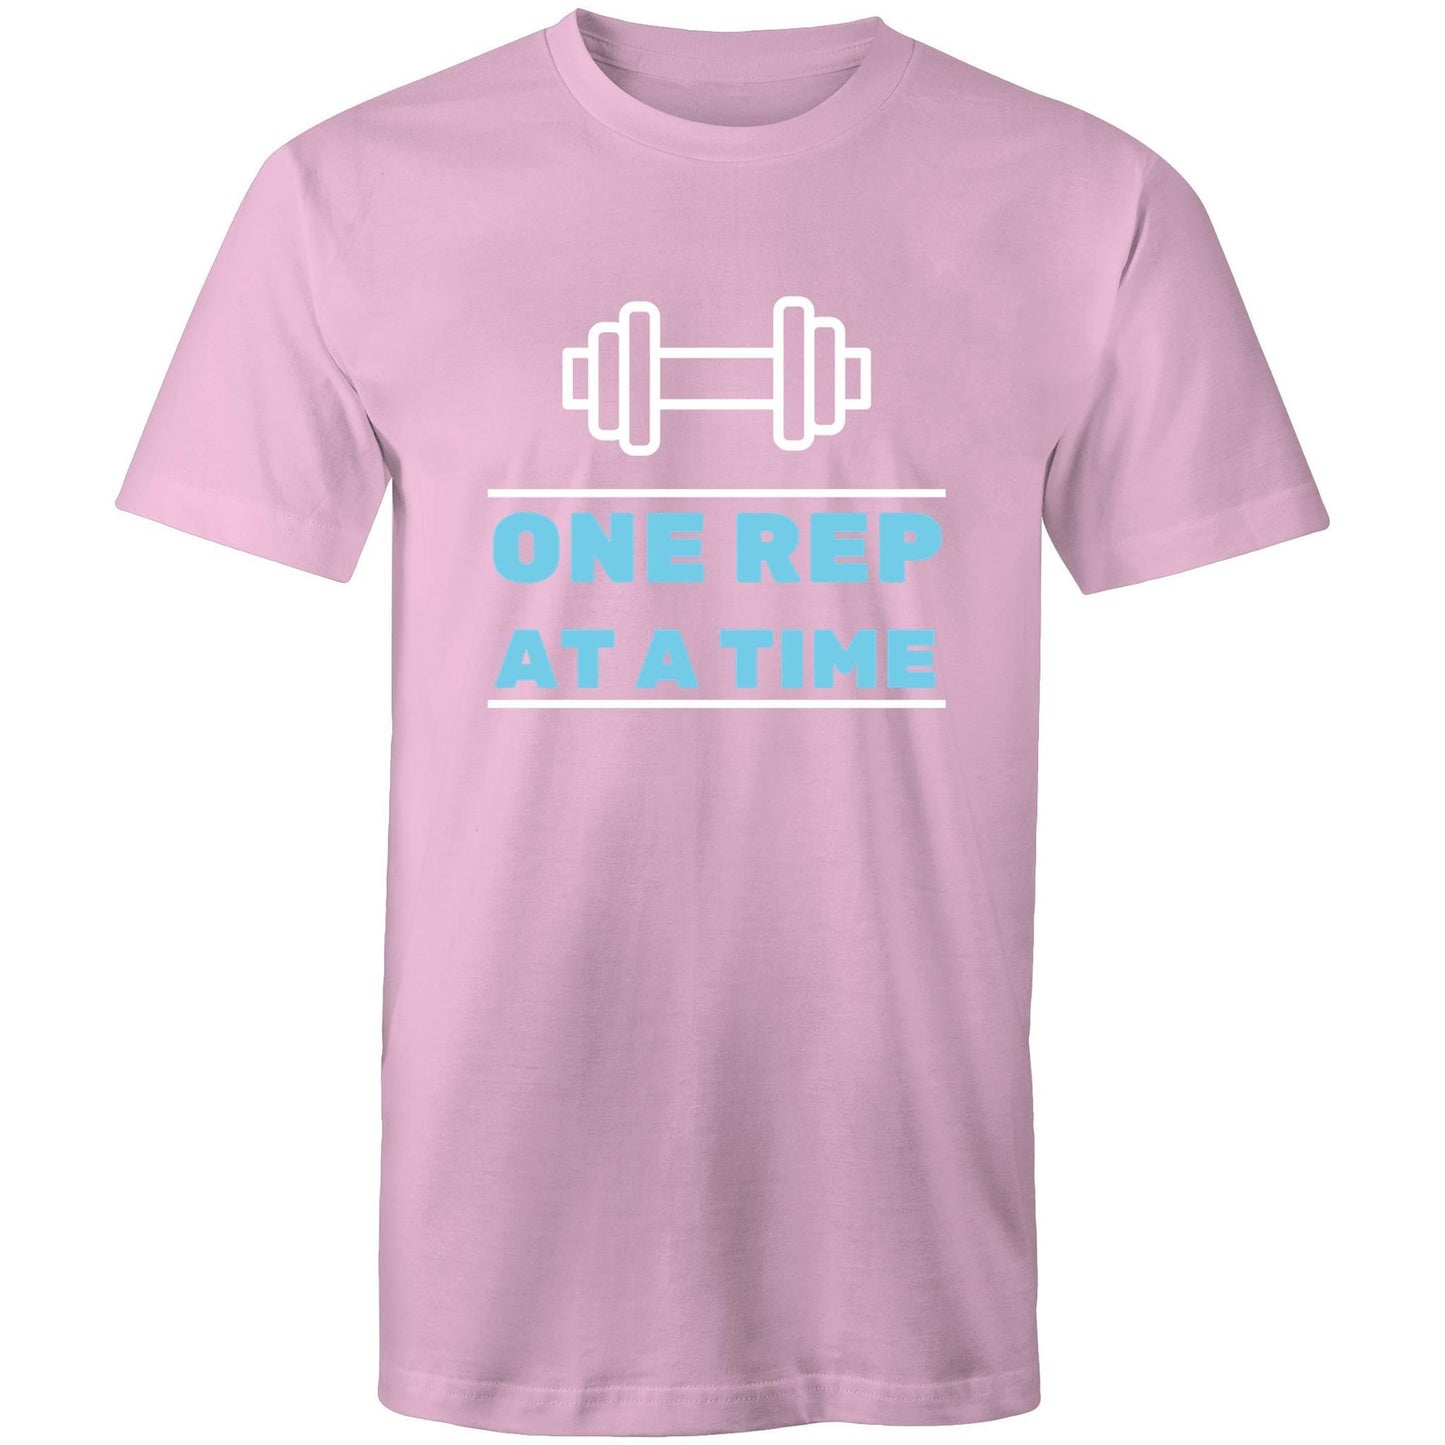 One Rep At A Time - Short Sleeve T-shirt Pink Fitness T-shirt Fitness Mens Womens